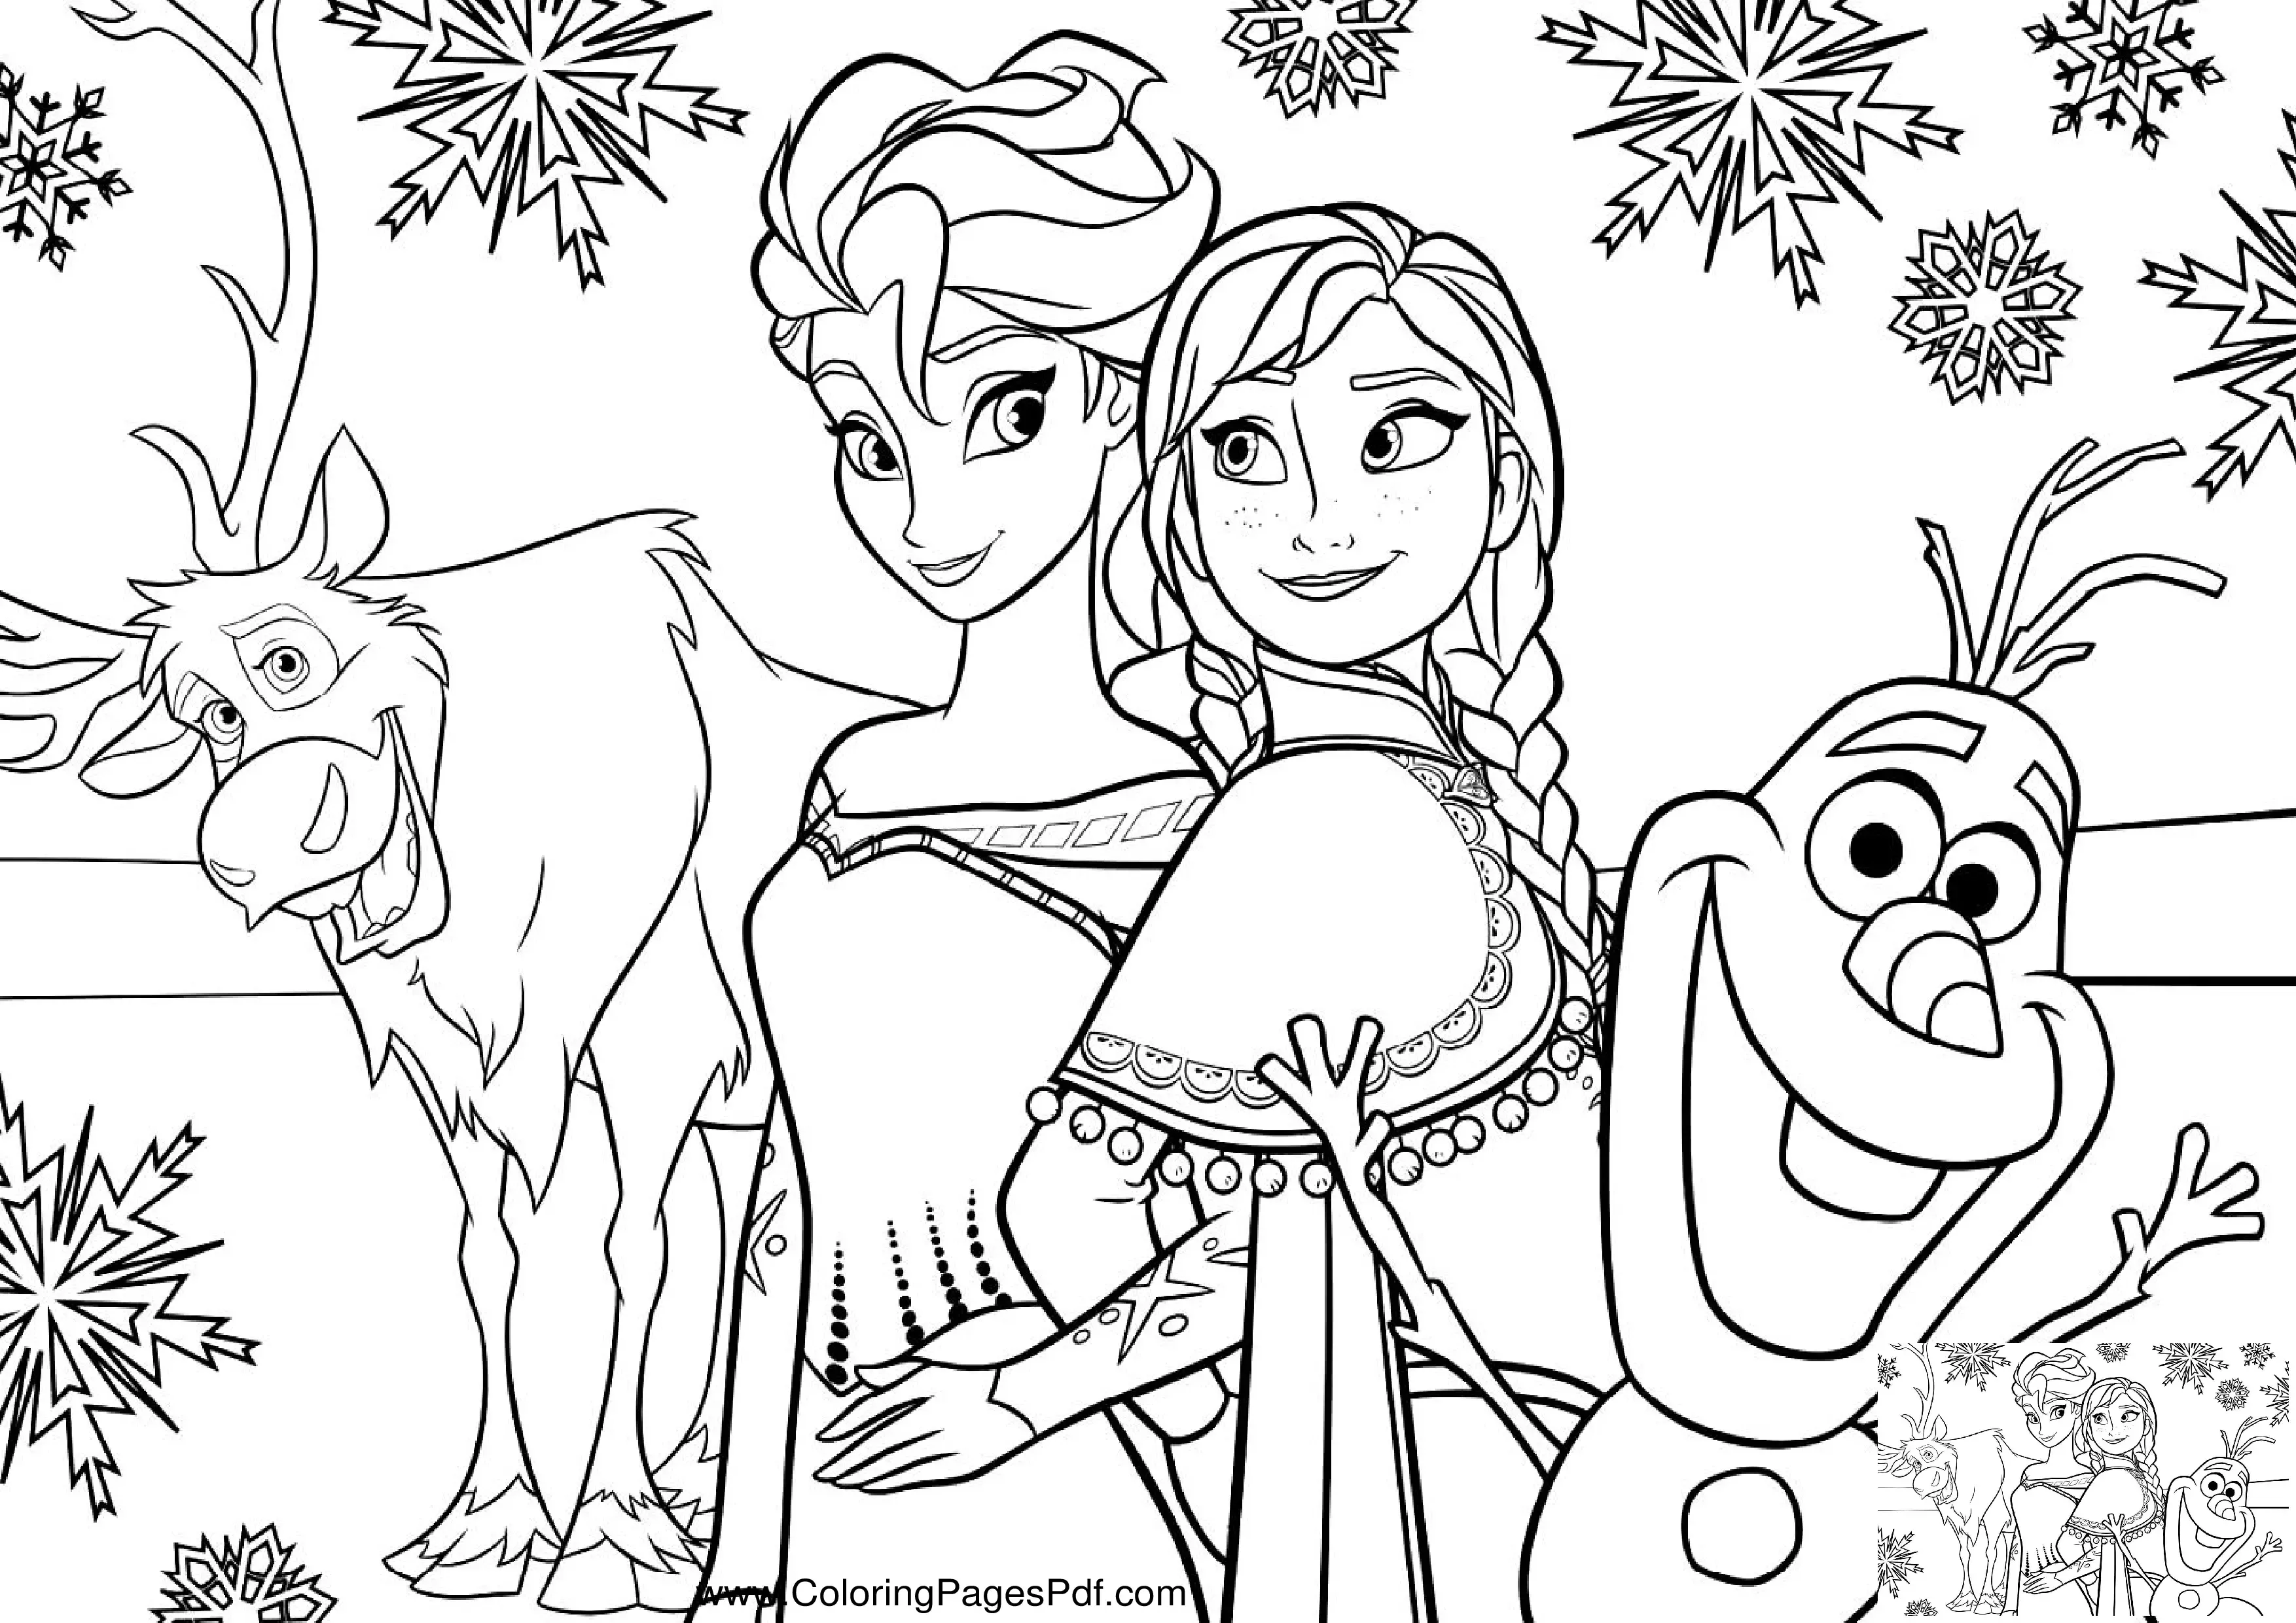 Frozen printable images